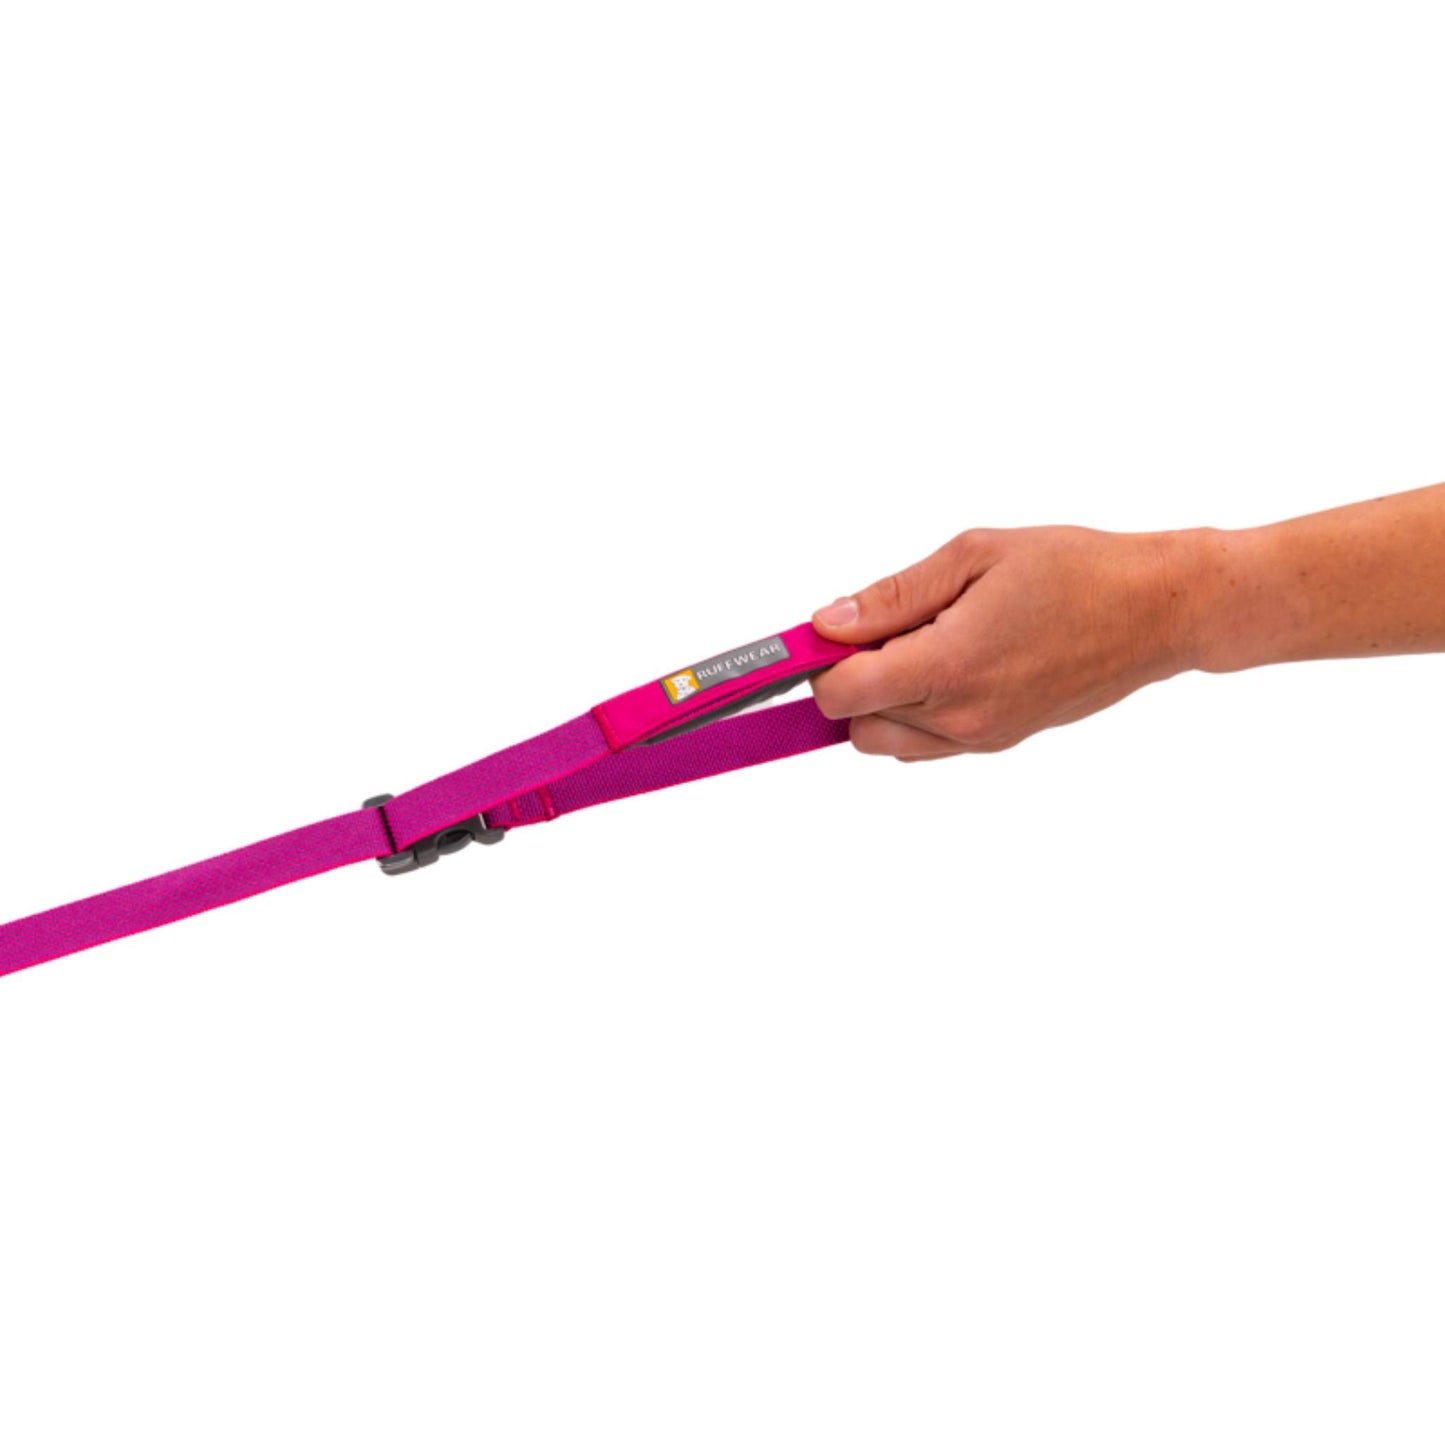 holding the handle of the flagline lead alpenglow pink